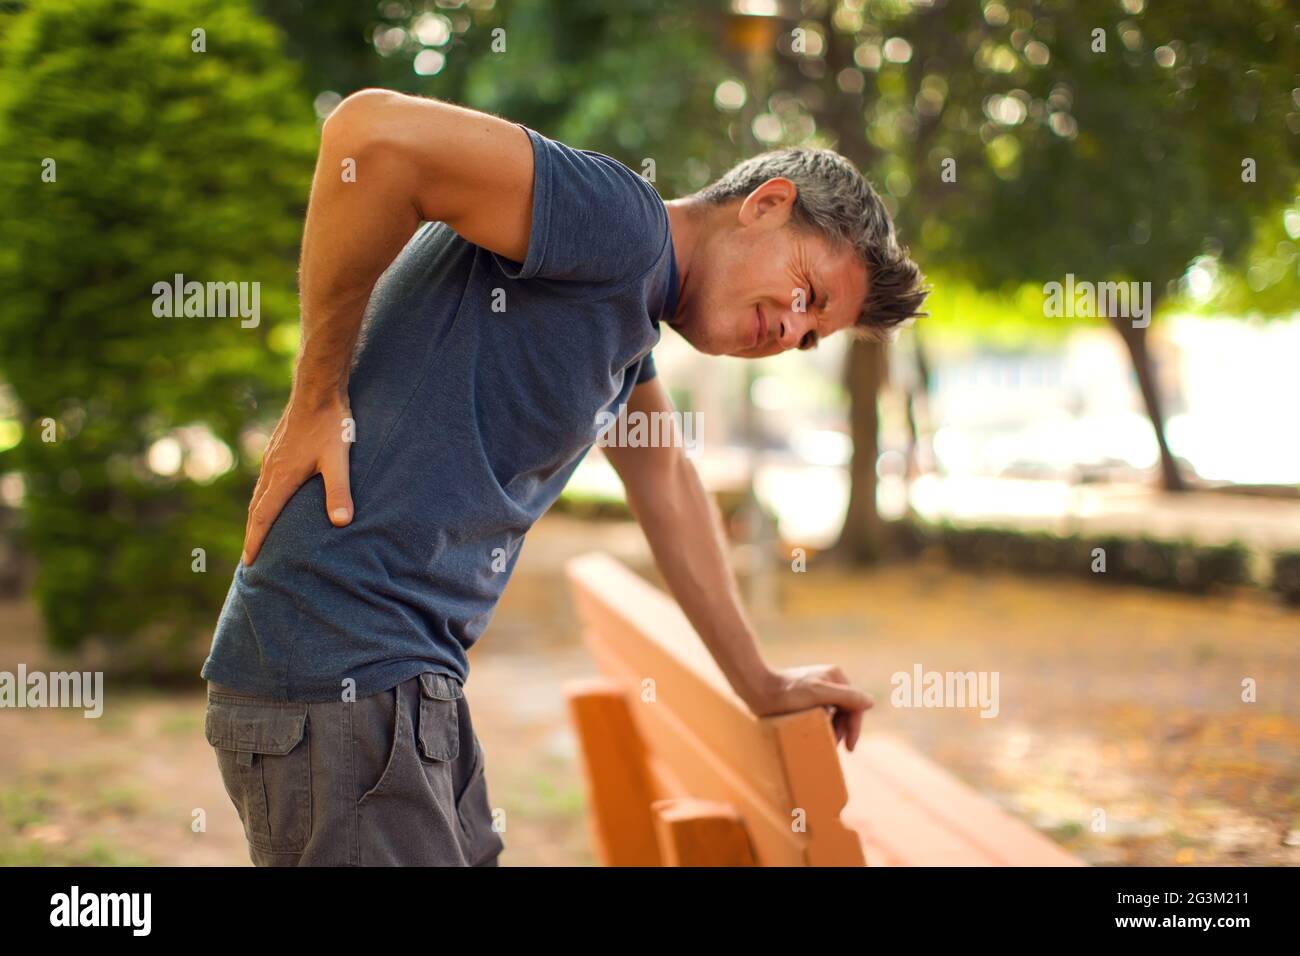 Man with back pain in the park. Healthcare and medicine concept Stock Photo